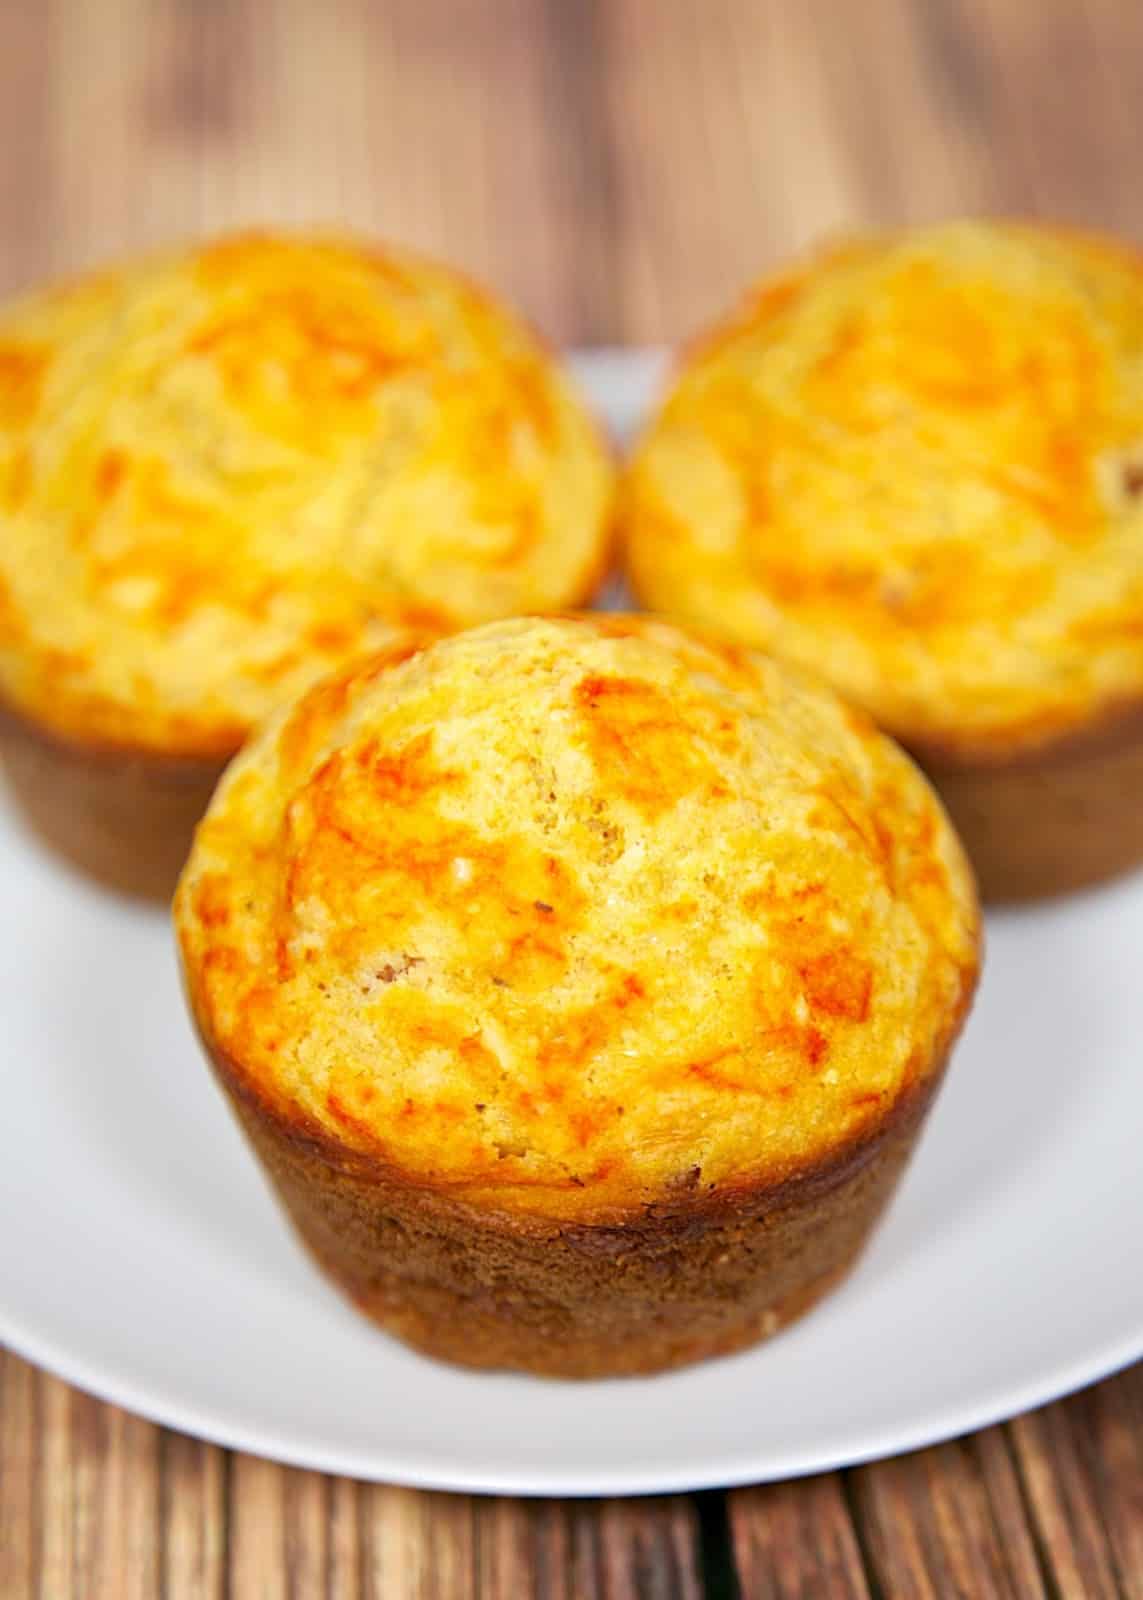 Bacon & Sriracha Corn Muffins Recipe - homemade corn muffins with bacon and a swirl of Sriracha. Great with soups, stews and grilled meats.